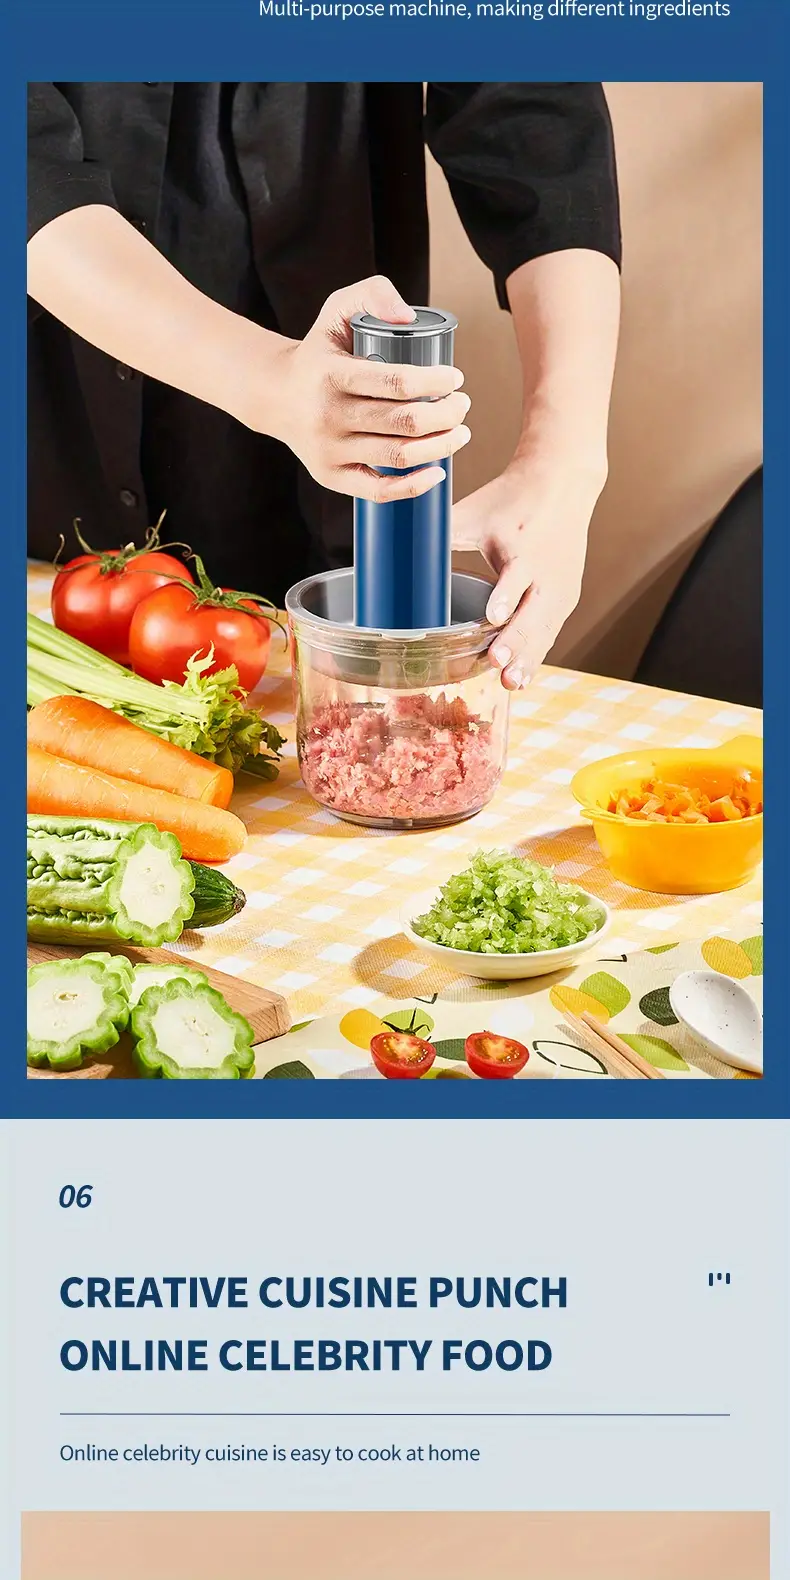 POSAME Mini Food Processor Meat Grinders Electric,Small Kitchen